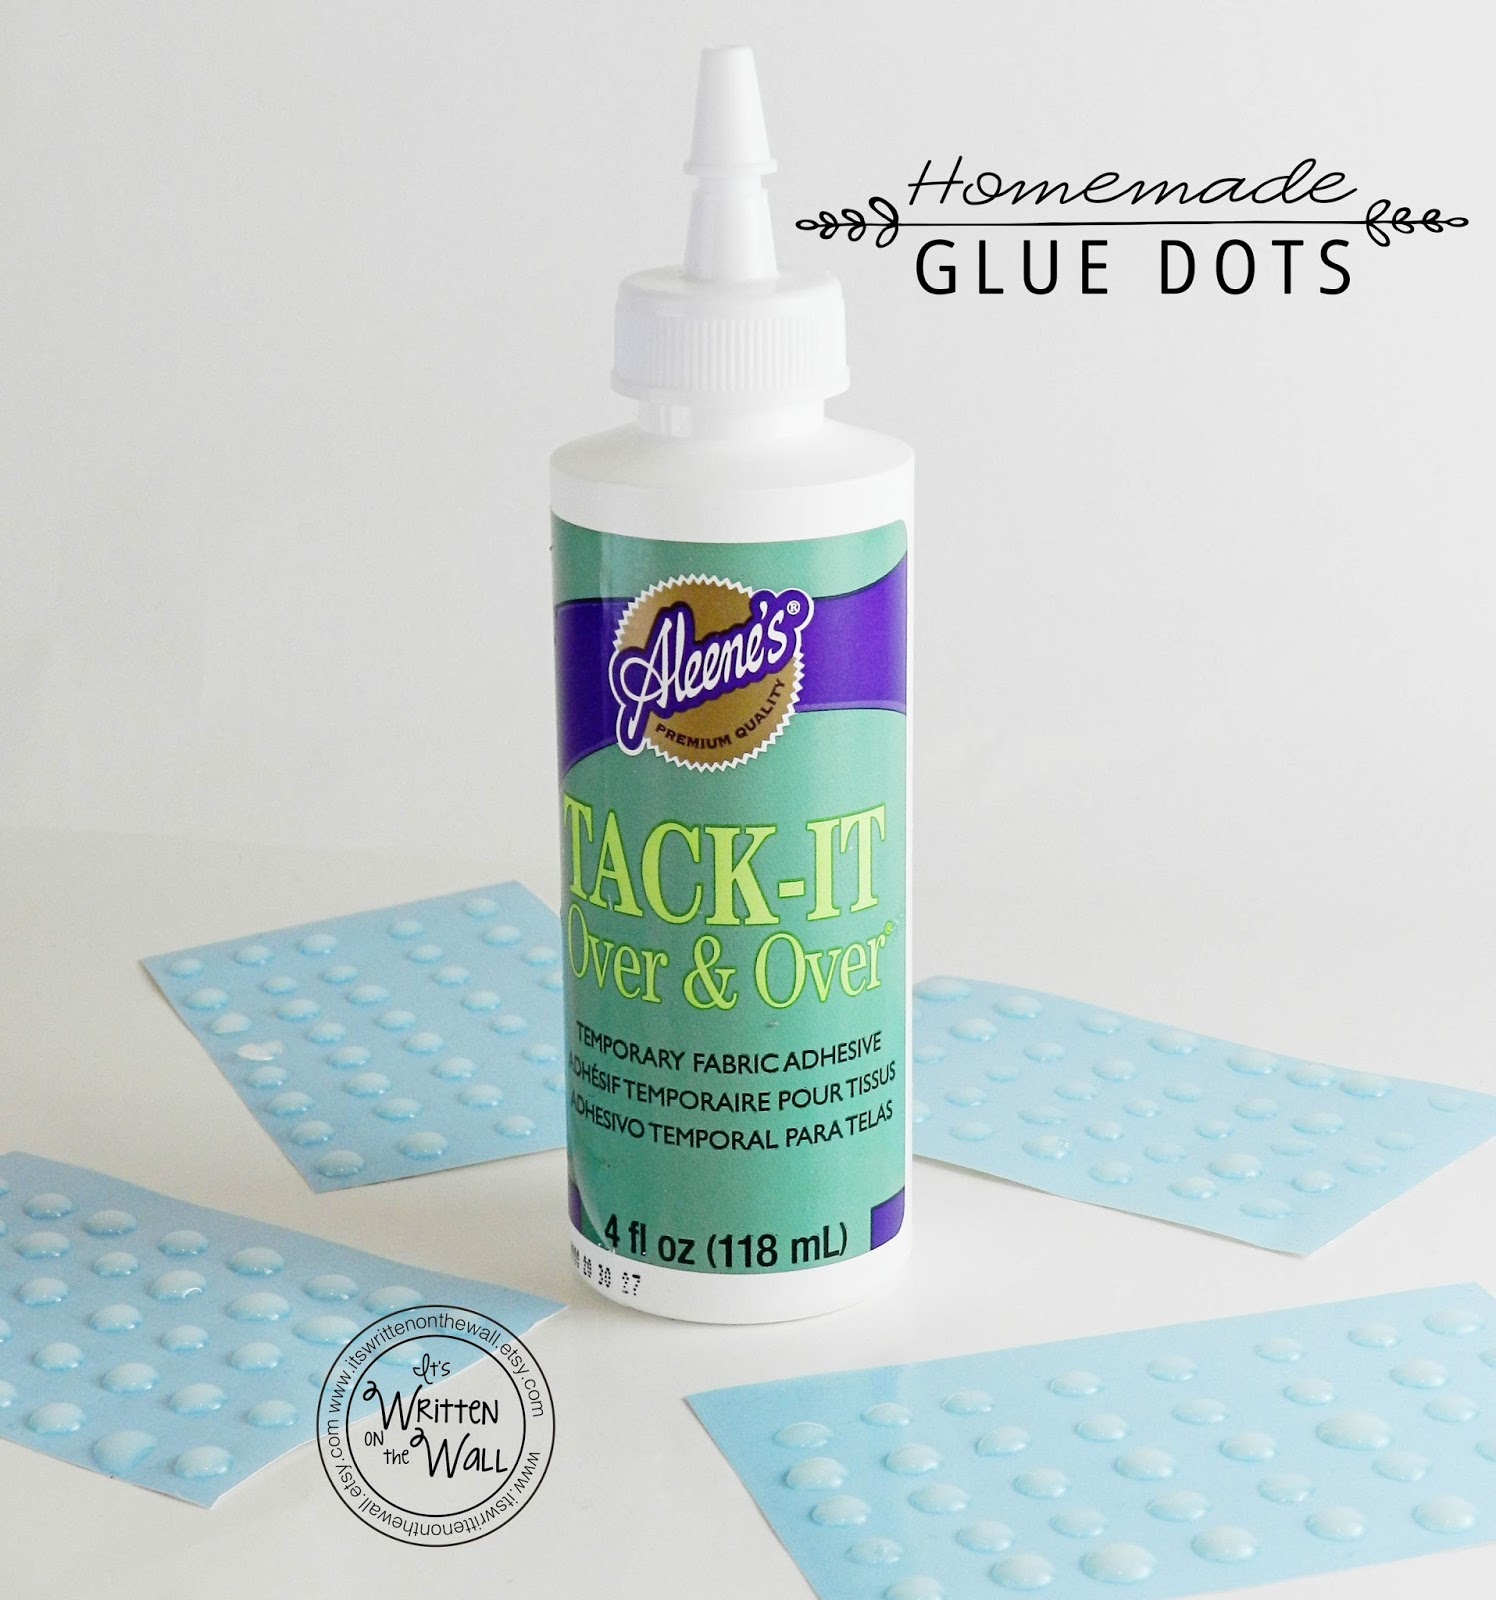 CRAFTING: SAVE Money-Make Your Own Glue Dots Tutorial is SIMPLE - It's  Written on the Wall